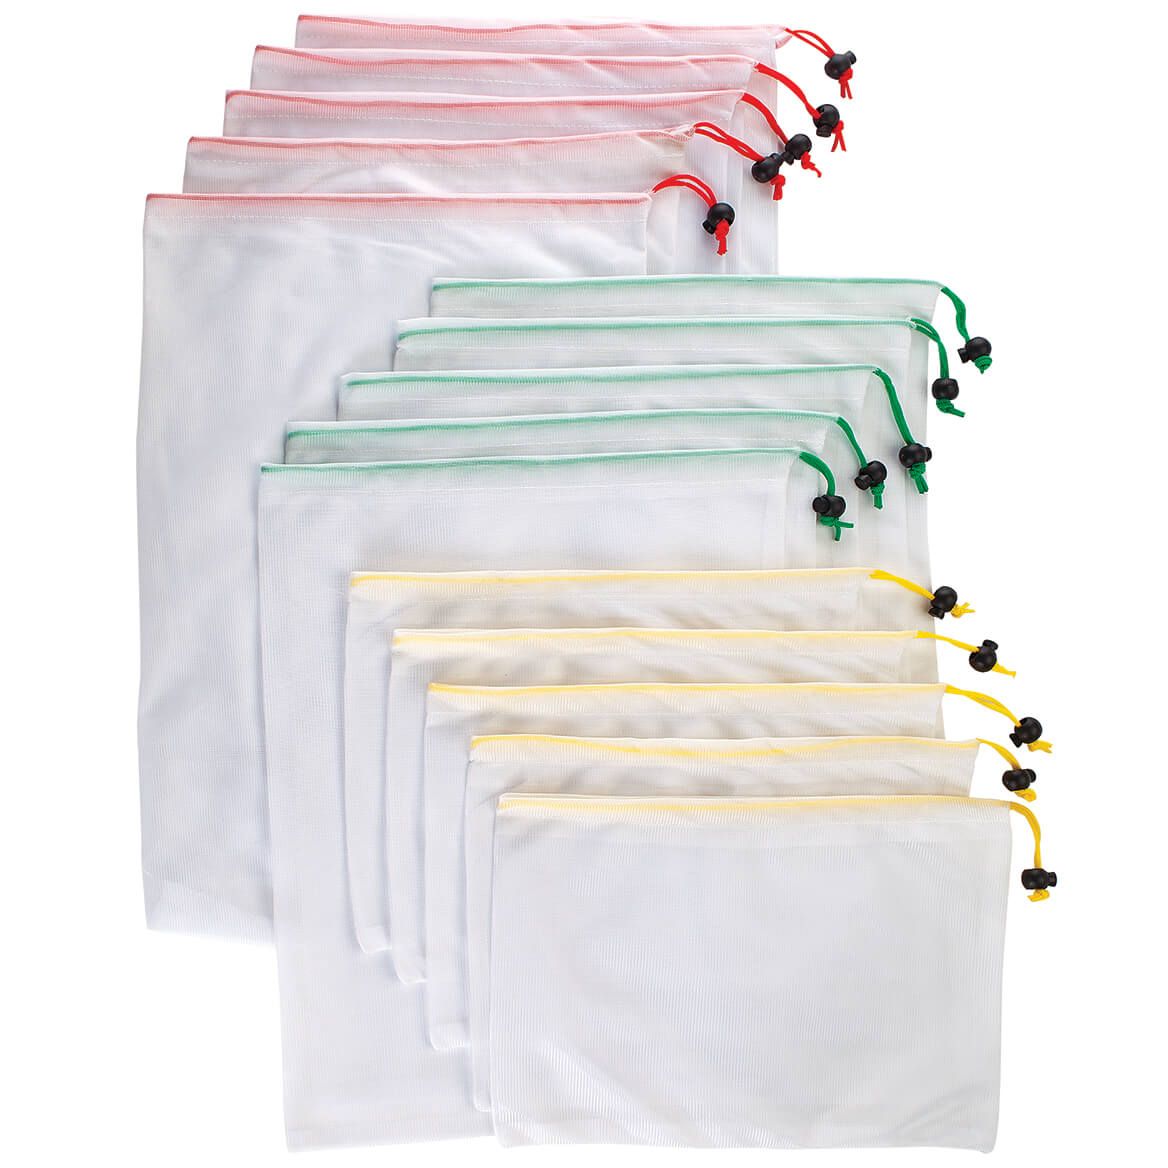 Reusable Mesh Produce Bags by Chef's Pride™, Set of 15 + '-' + 373310